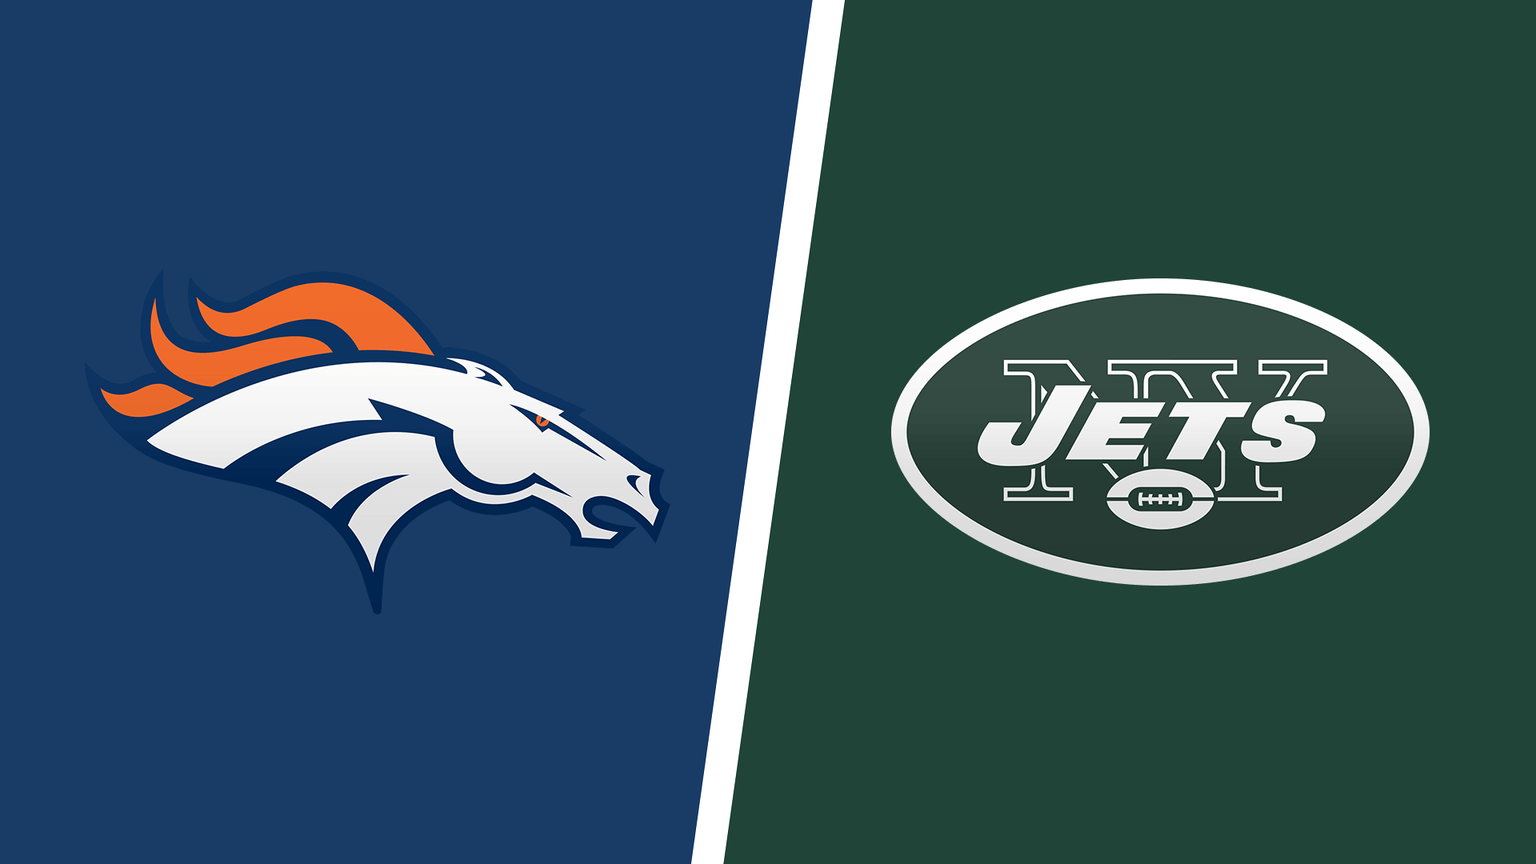 How to Watch New York Jets vs. Denver Broncos Game Live Online on